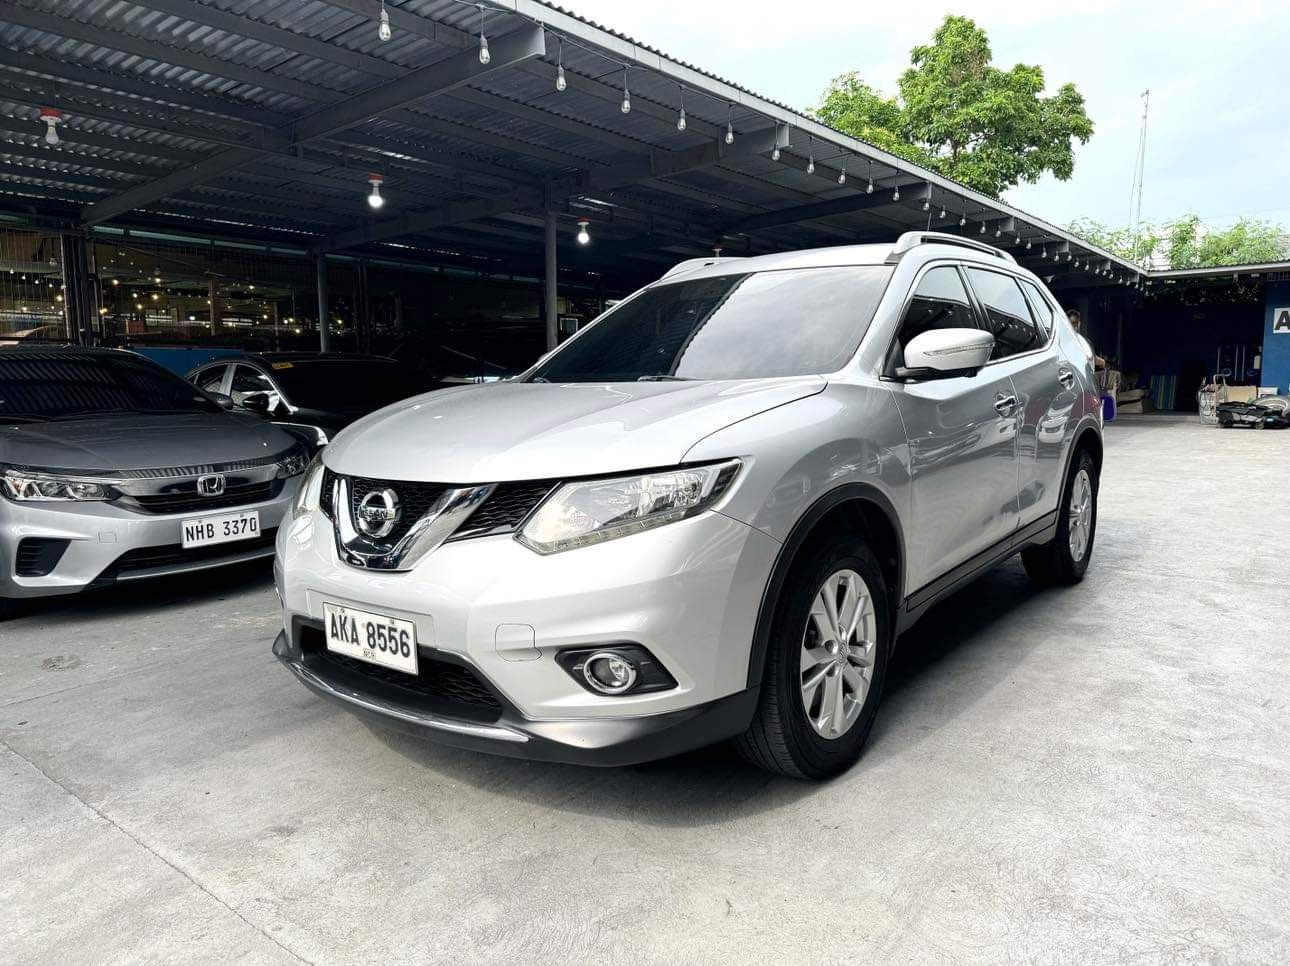 2015 Nissan Xtrail Automatic 4X4 7 Seater Leather